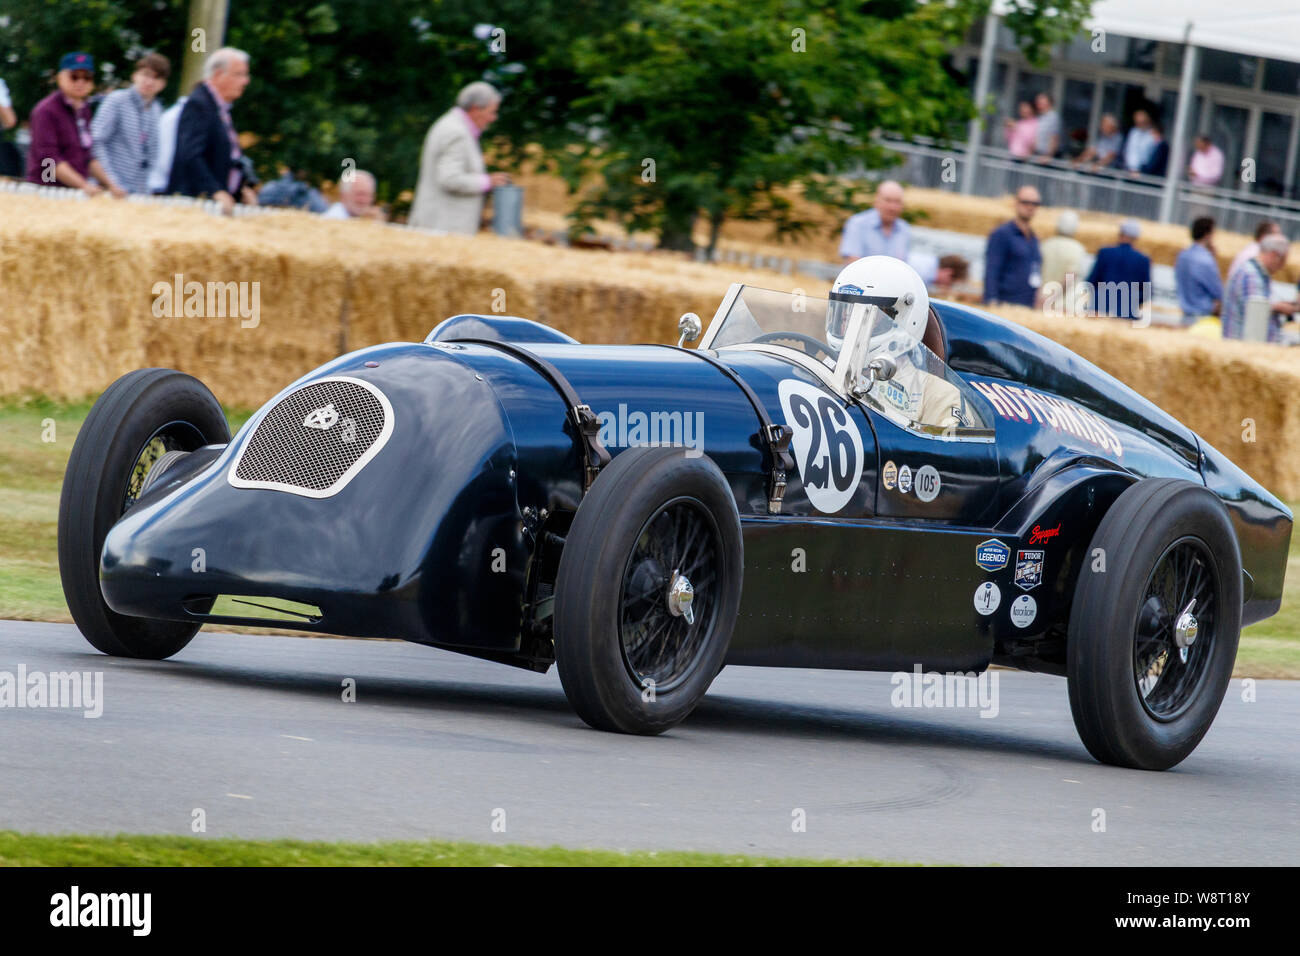 1930 Hotchkiss AM 80 Record car with driver Steve Smith at the 2019 Goodwood Festival of Speed, Sussex, UK. Stock Photo